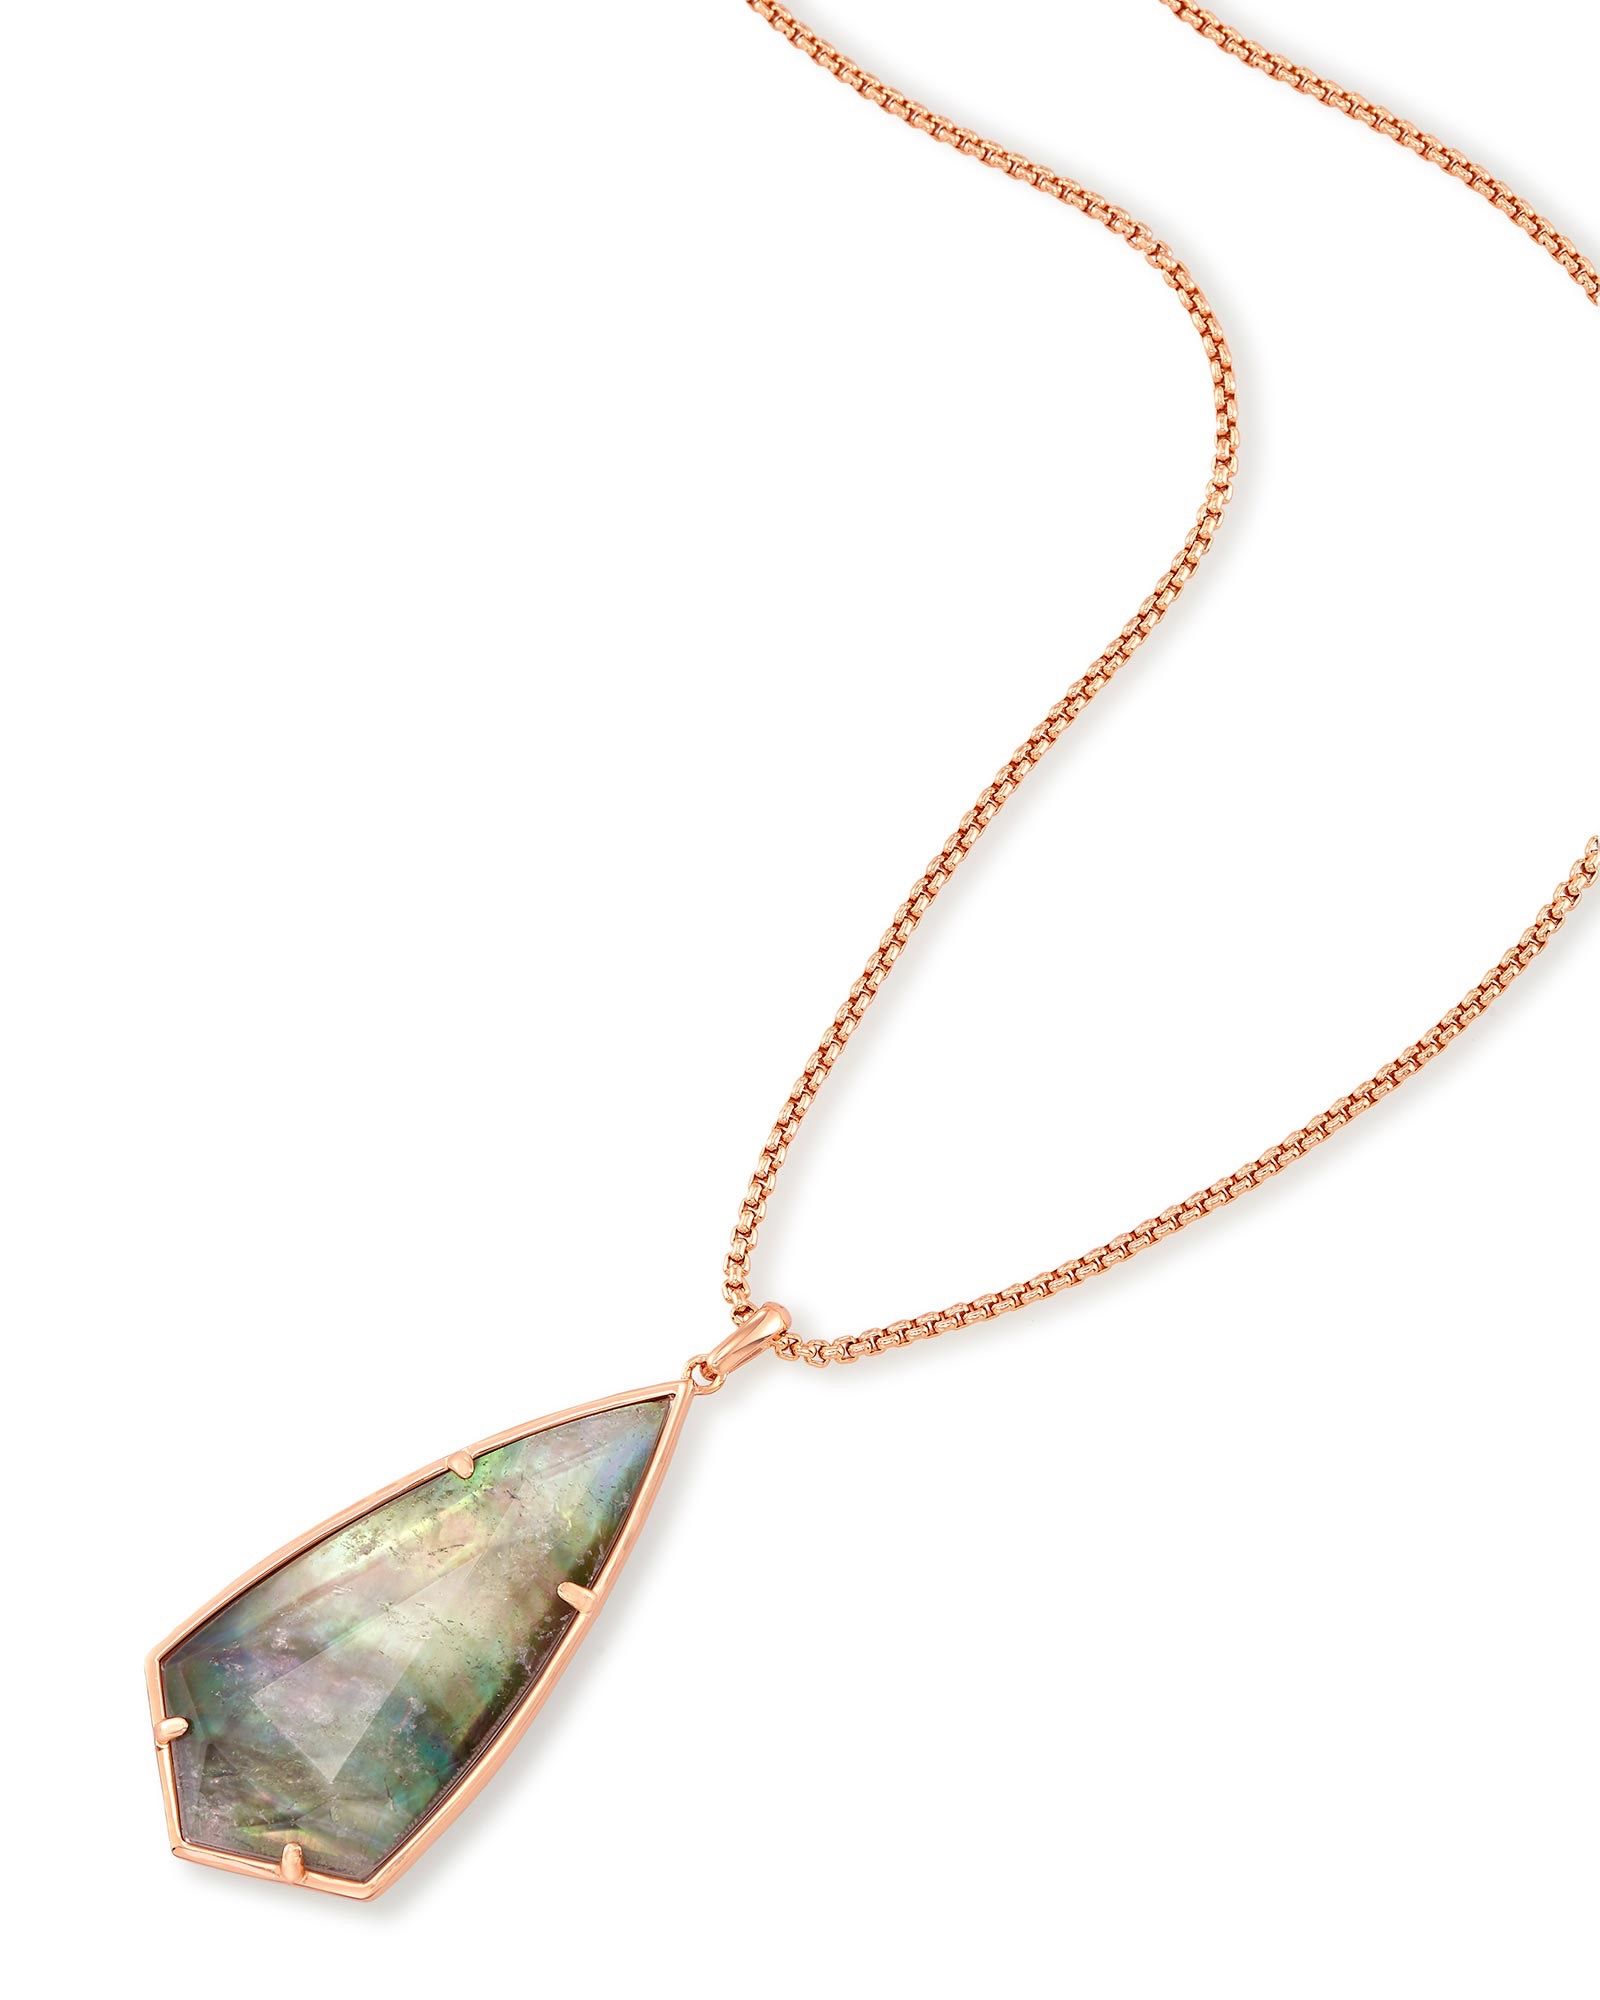 Carole Long Pendant Necklace in Crystal Gray Illusion | Kendra Scott